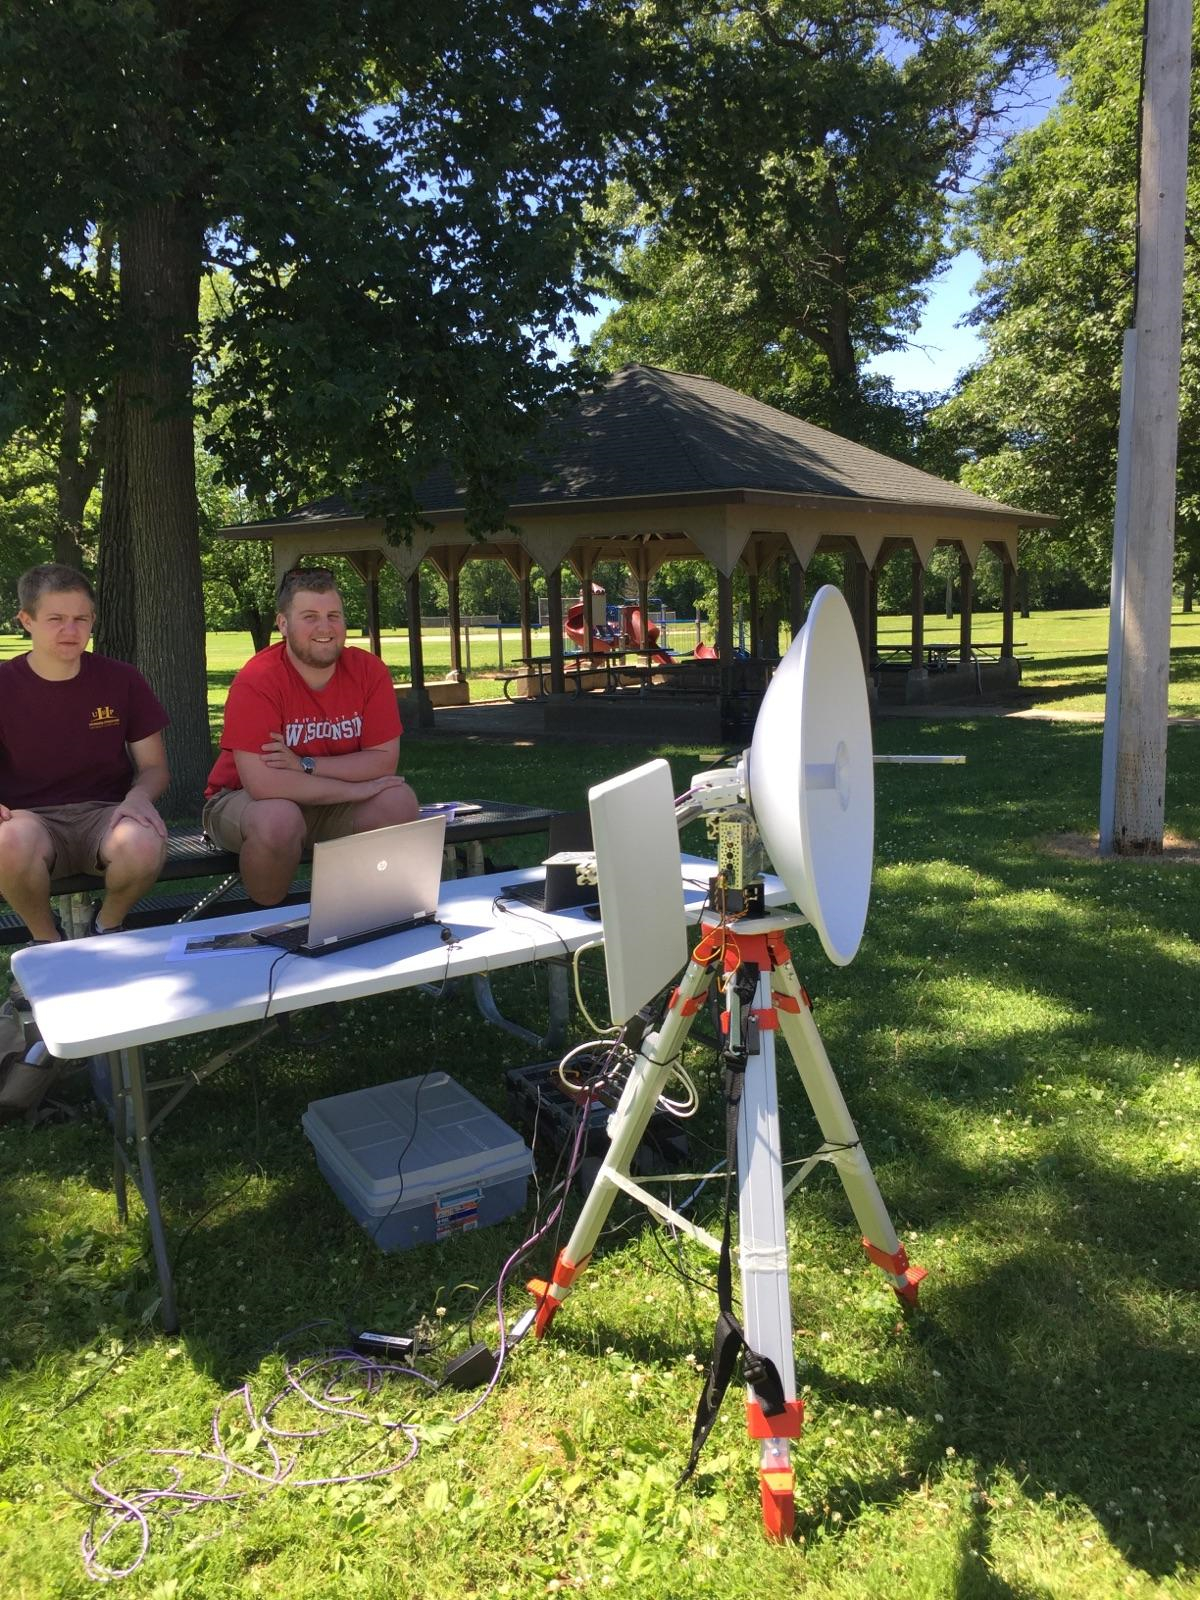 Ground station with operators.